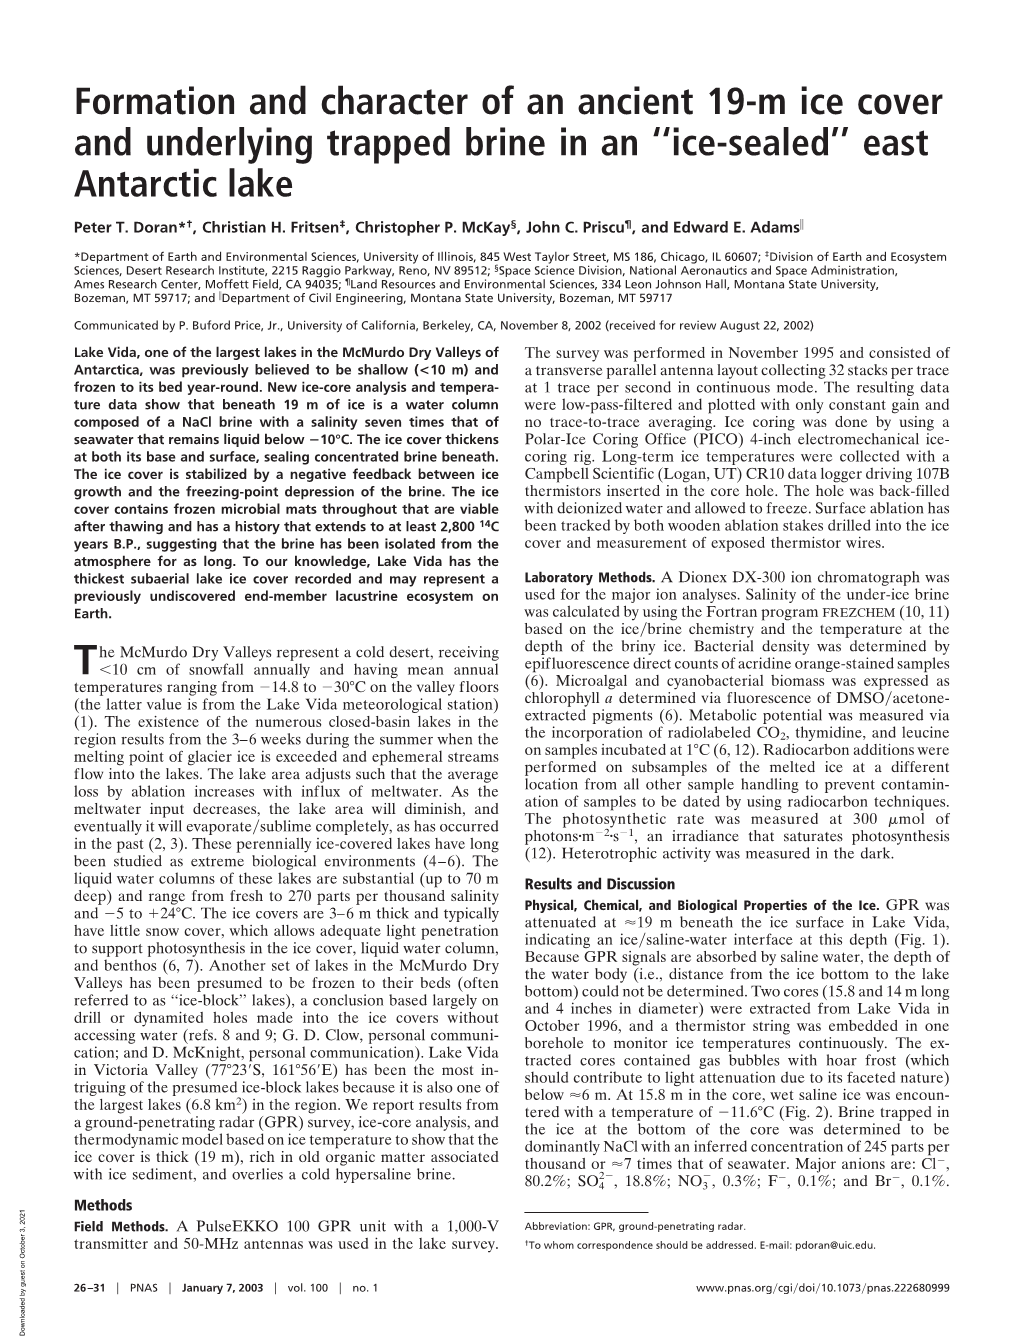 Formation and Character of an Ancient 19-M Ice Cover and Underlying Trapped Brine in an ‘‘Ice-Sealed’’ East Antarctic Lake